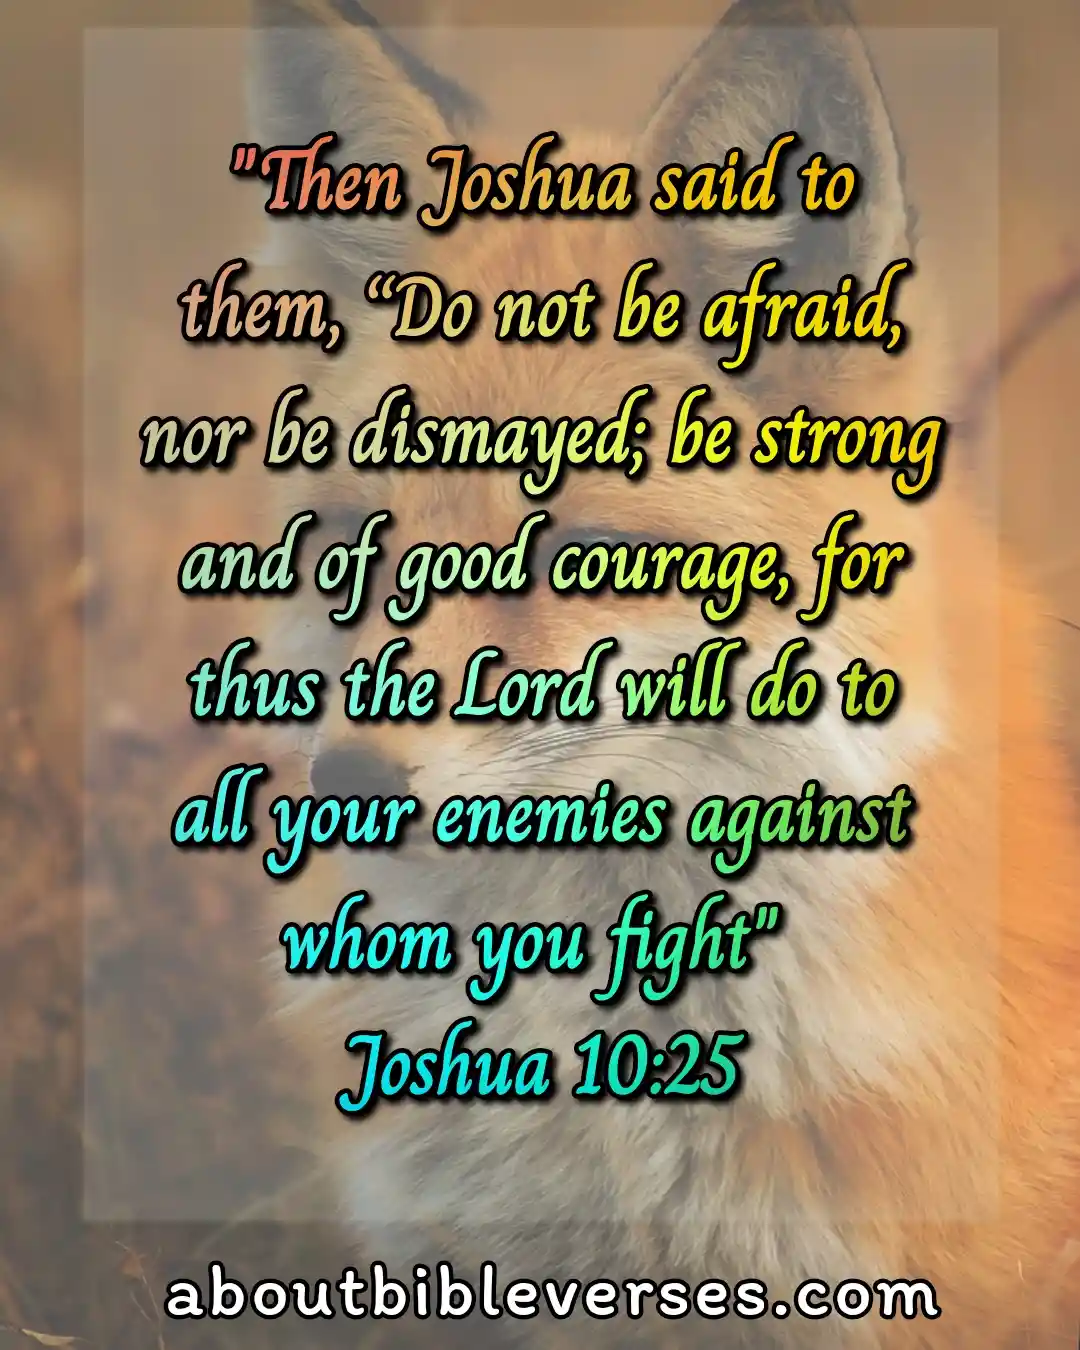 Bible Verses About Courage (Joshua 10:25)